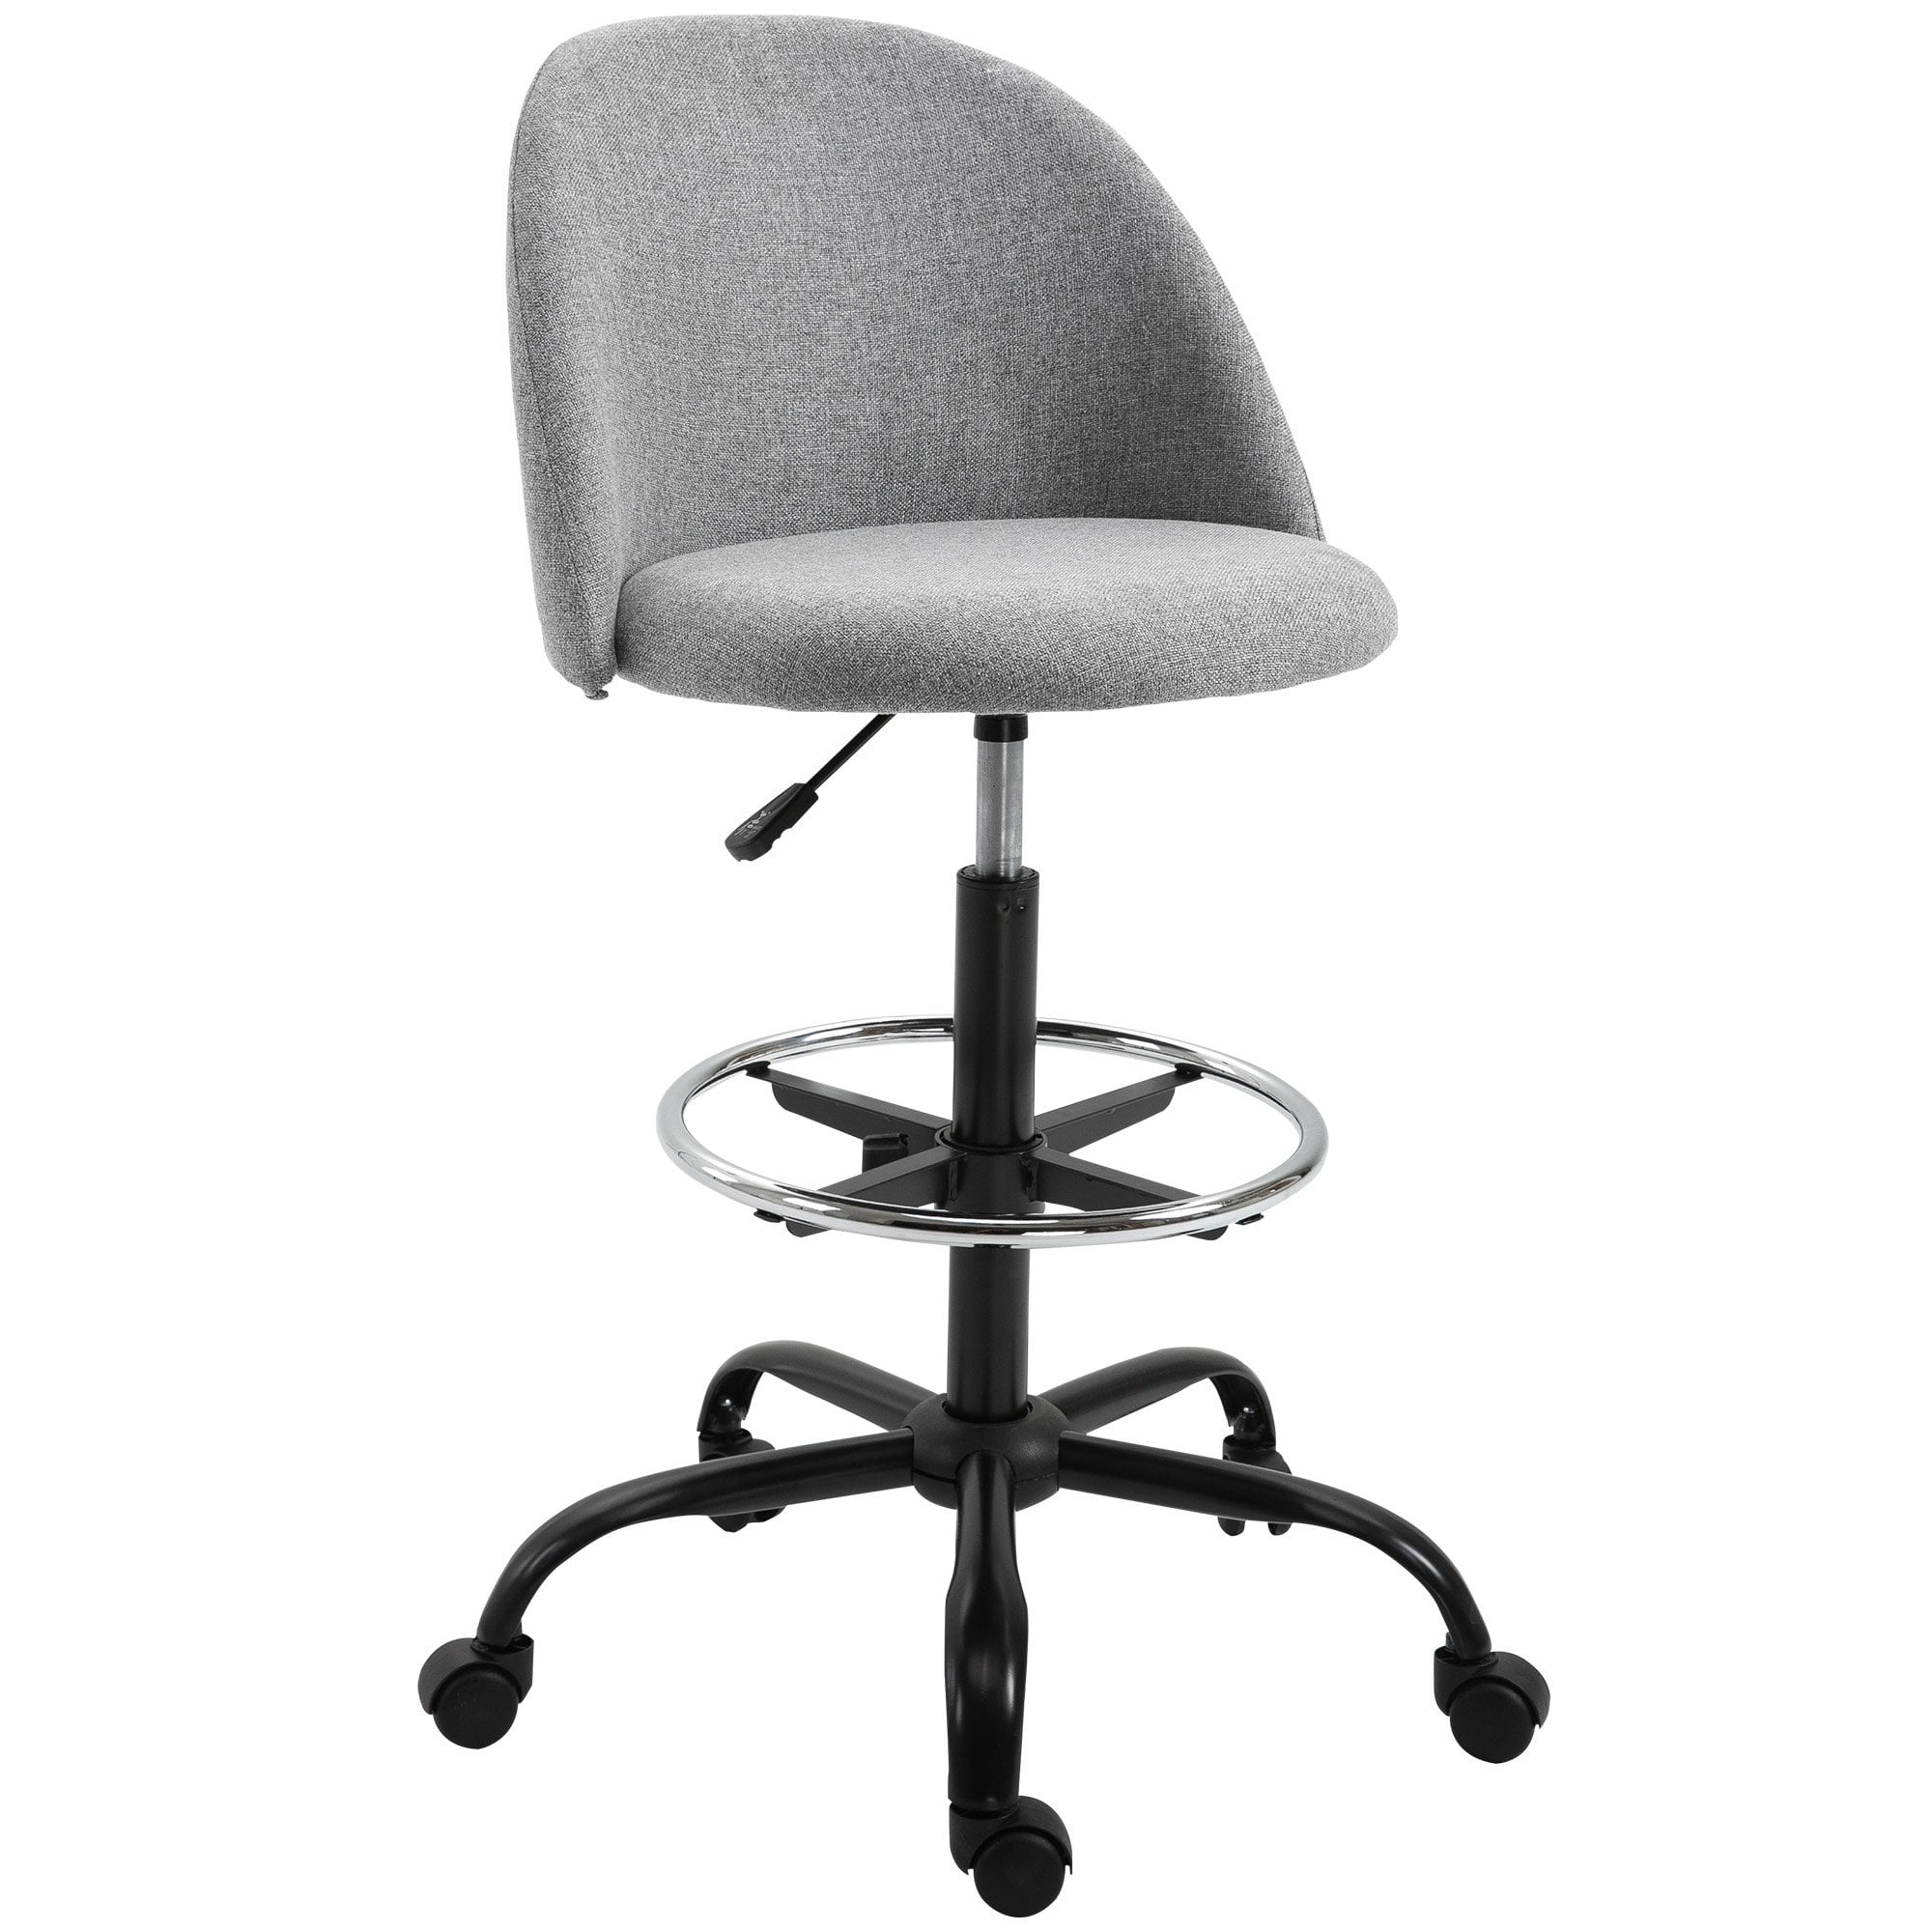 Vinsetto Padded Polyester Tall Design Office Chair Grey - CARTER  | TJ Hughes